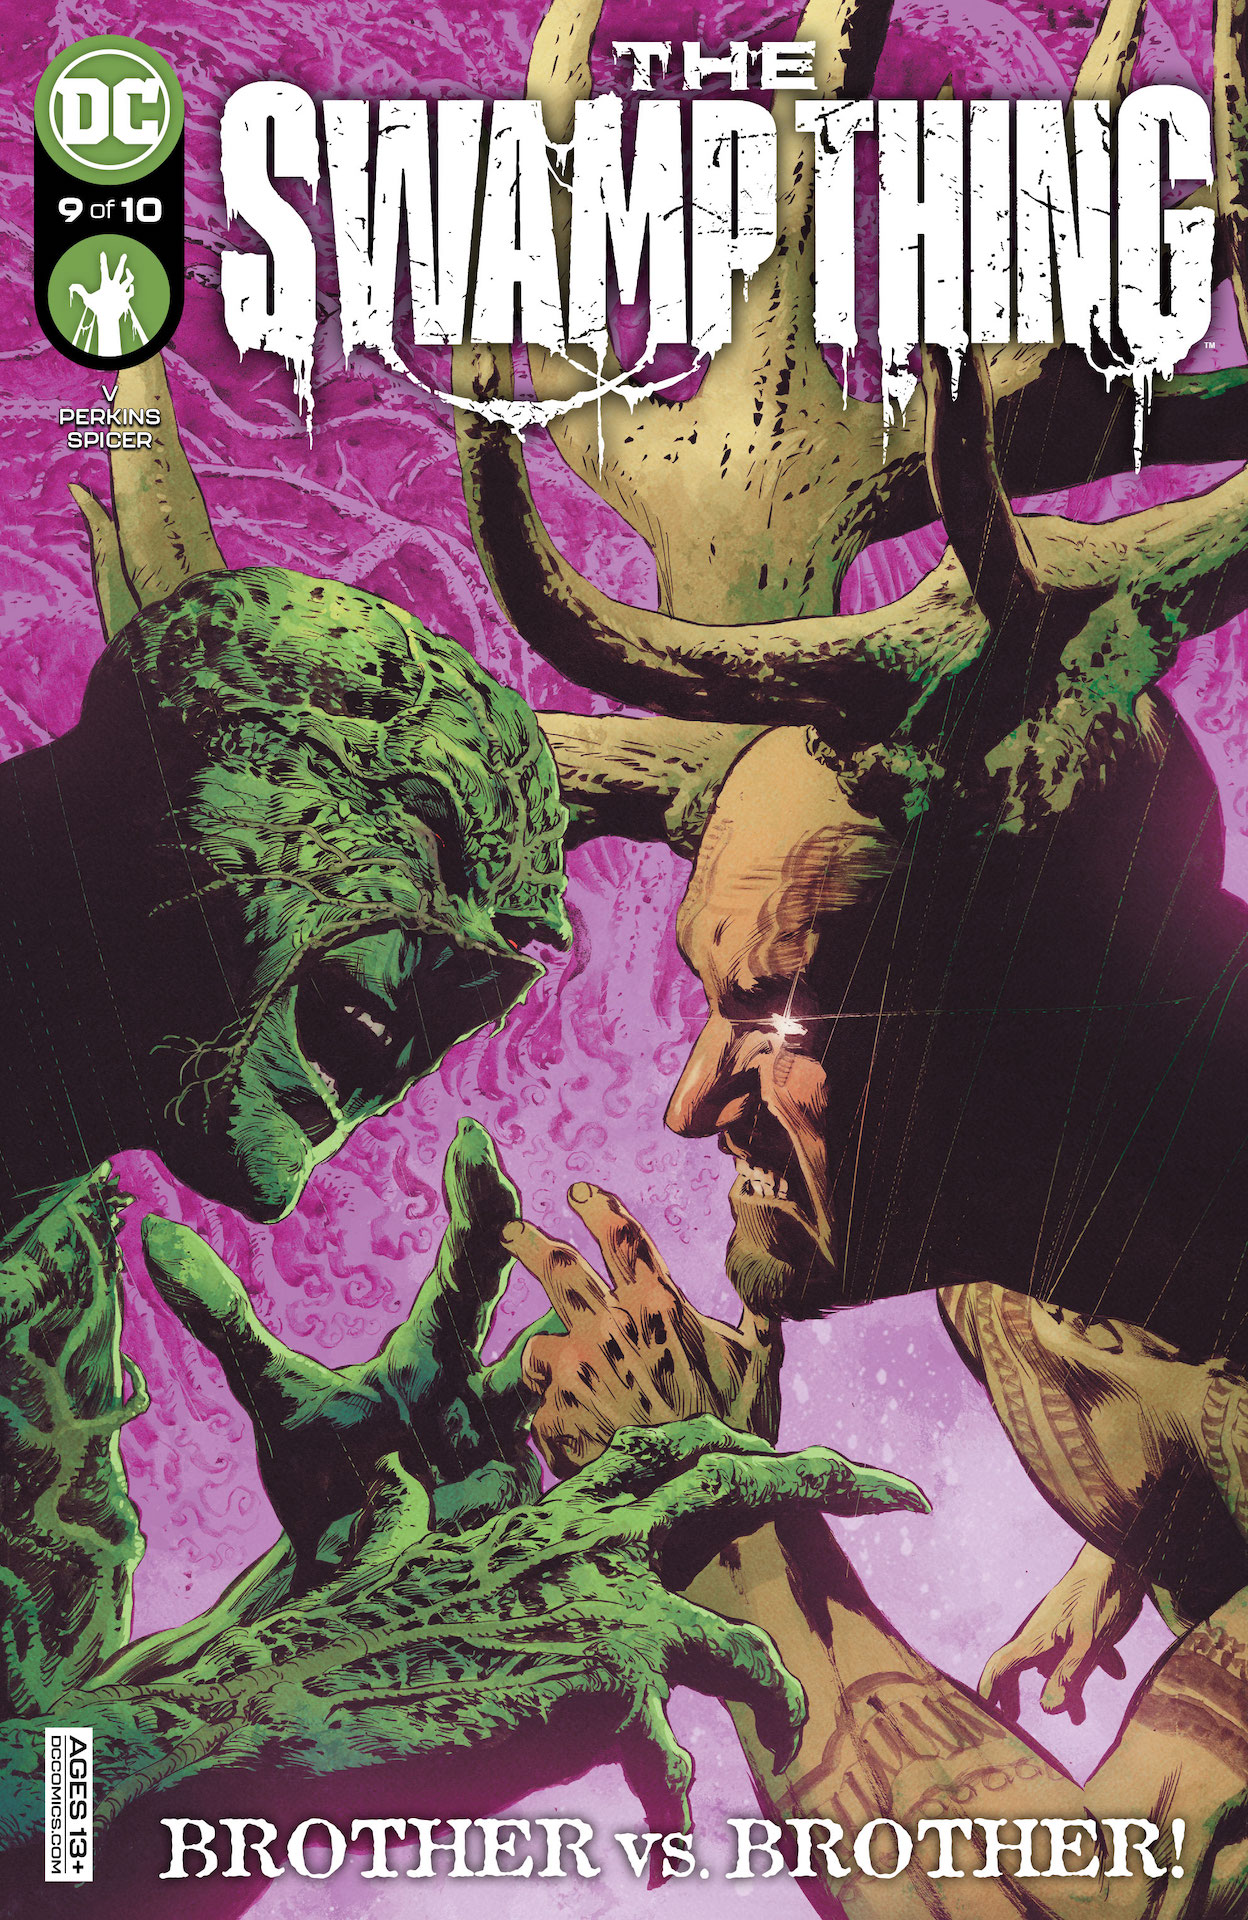 DC Preview: Swamp Thing #9